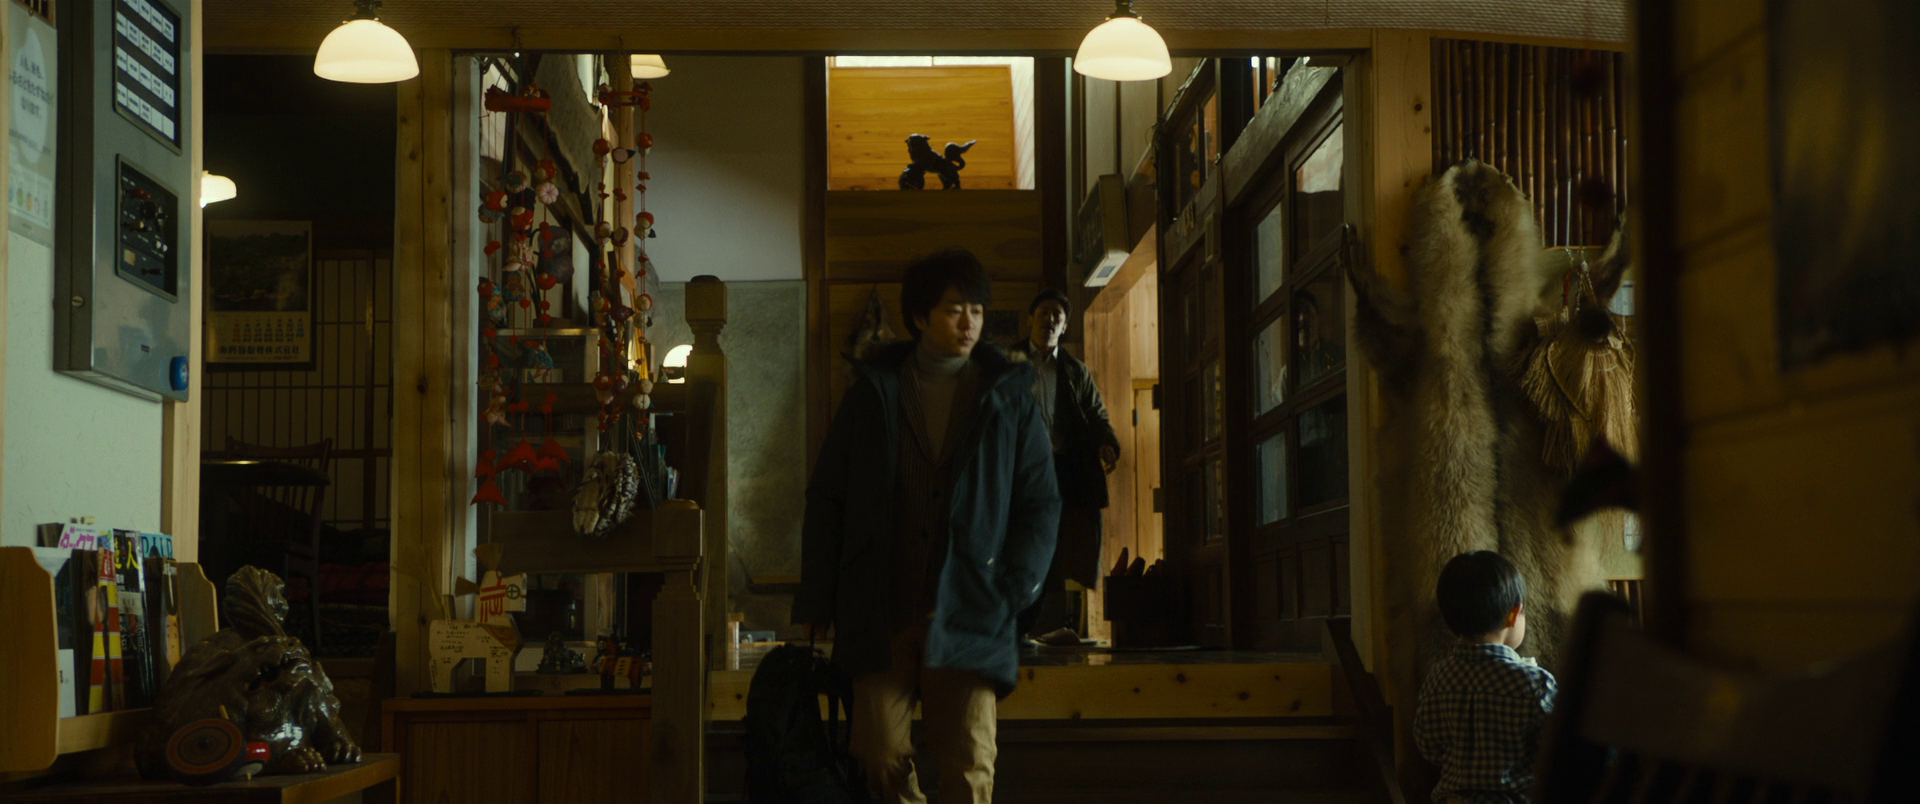 ˹ħŮ Laplaces.Witch.2018.JAPANESE.1080p.BluRay.x264.DTS-WiKi 9.75GB-2.png